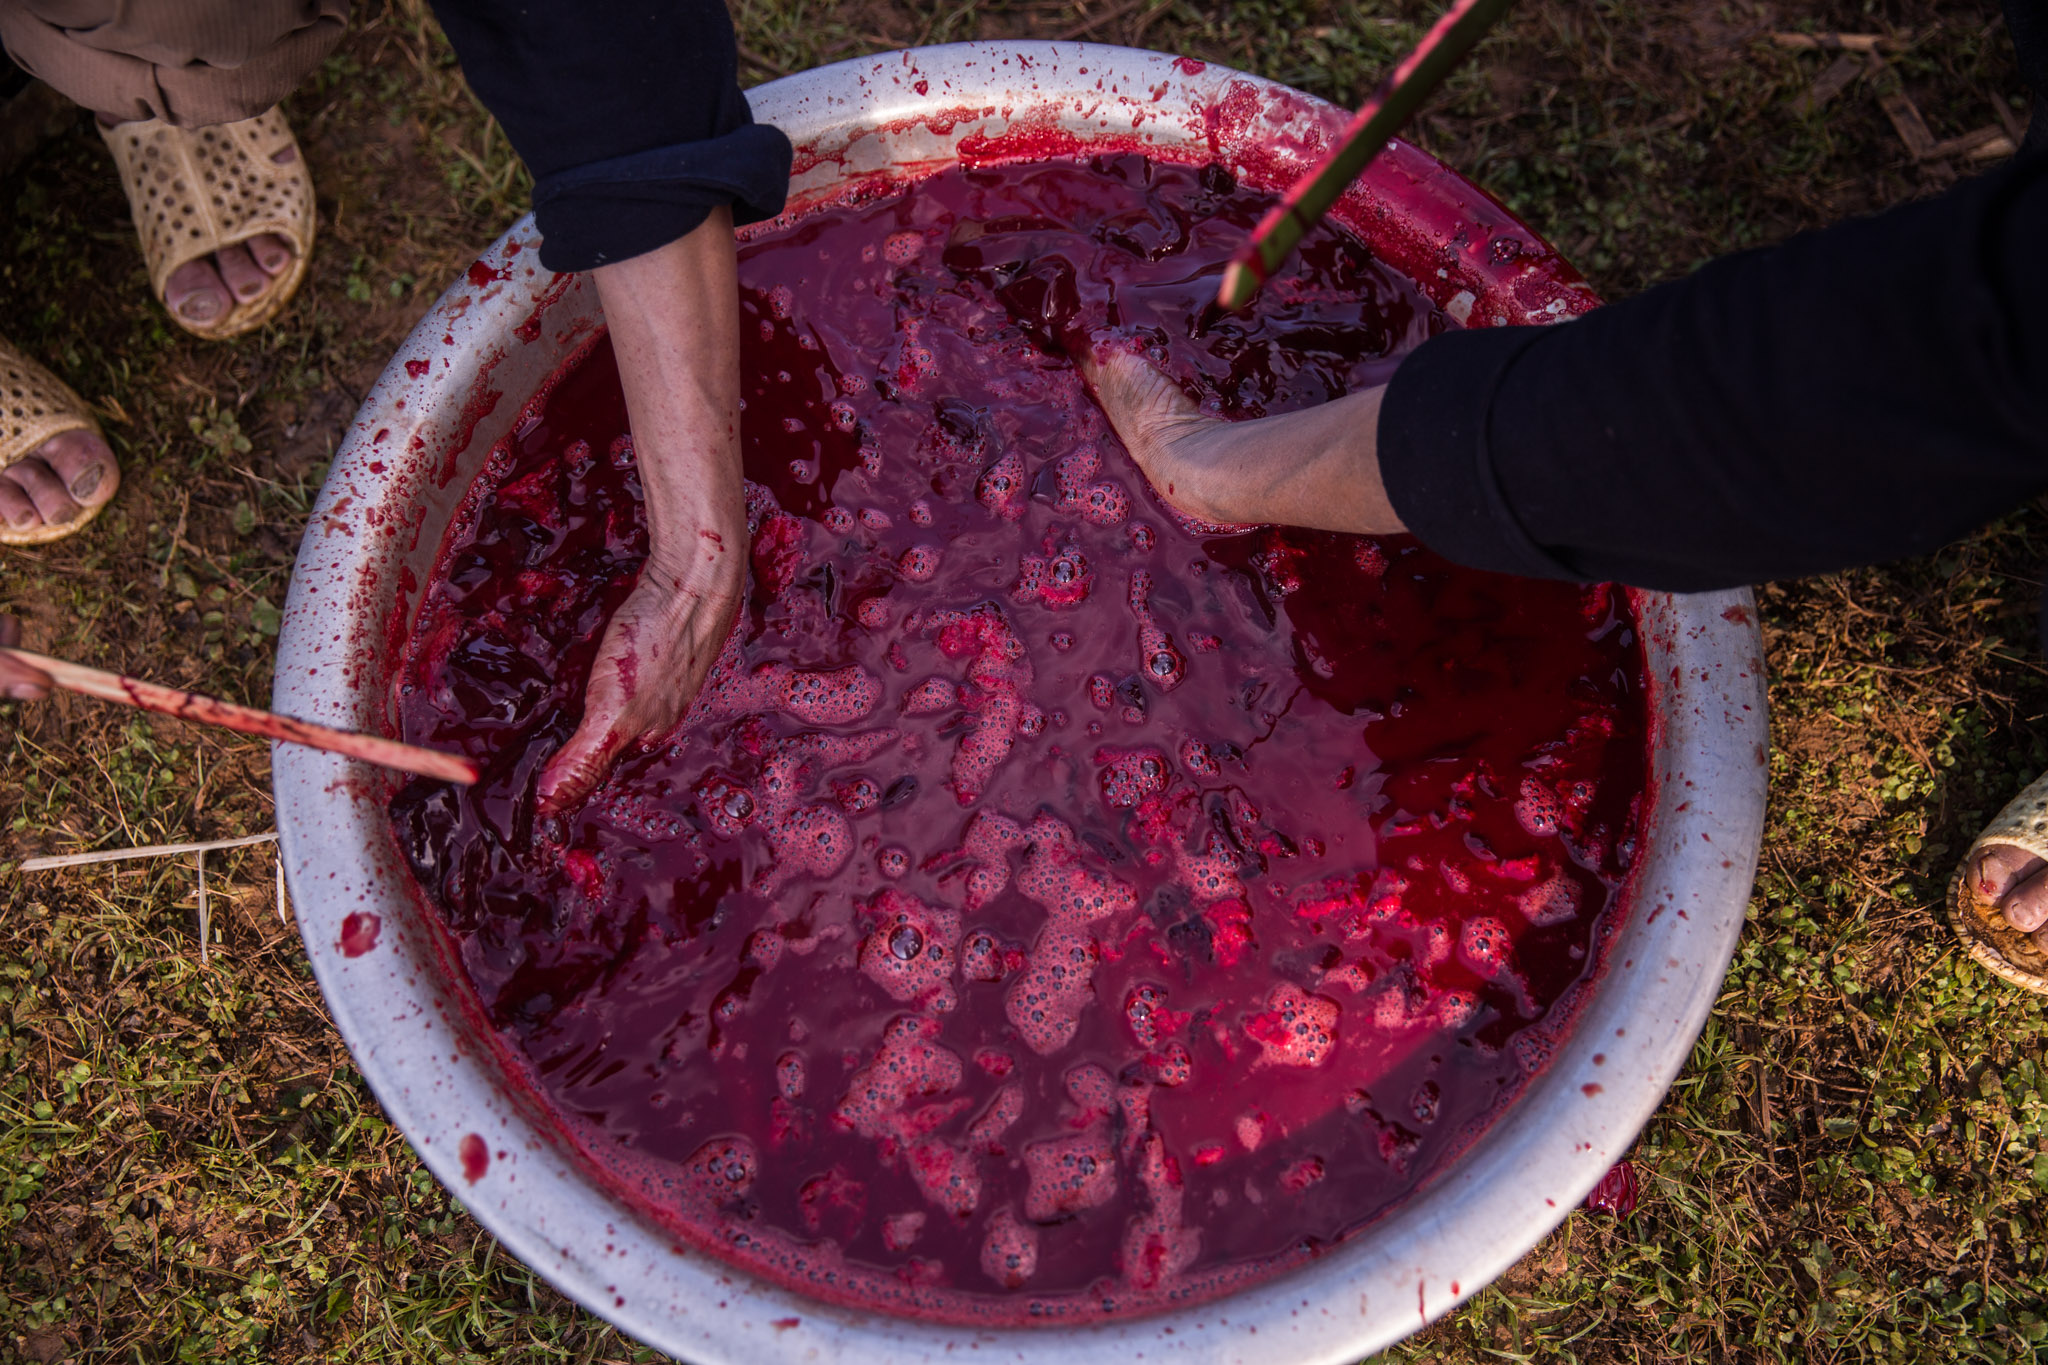 The blood is separated from the body of the animal and poured into different containers as an offering to the soul of the dead.